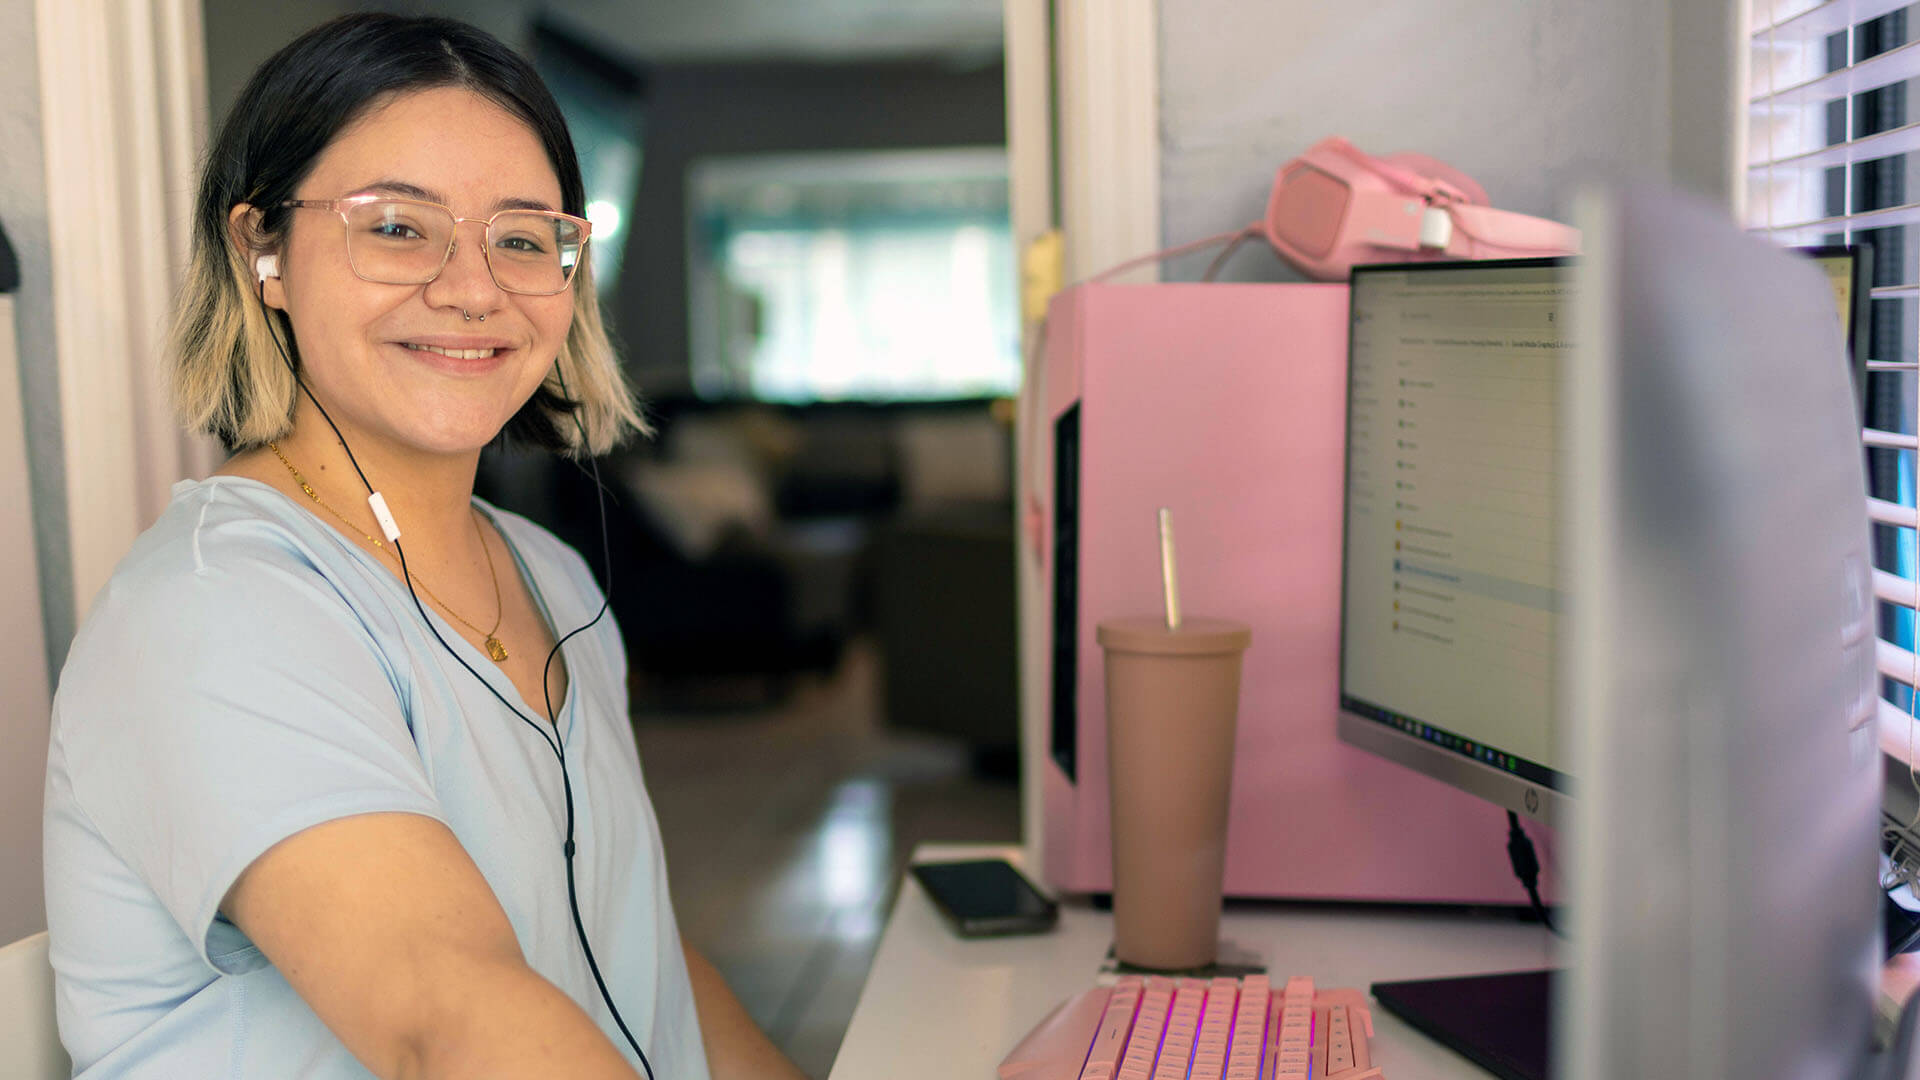 A woman with glasses wears headphones while sitting at a computer.